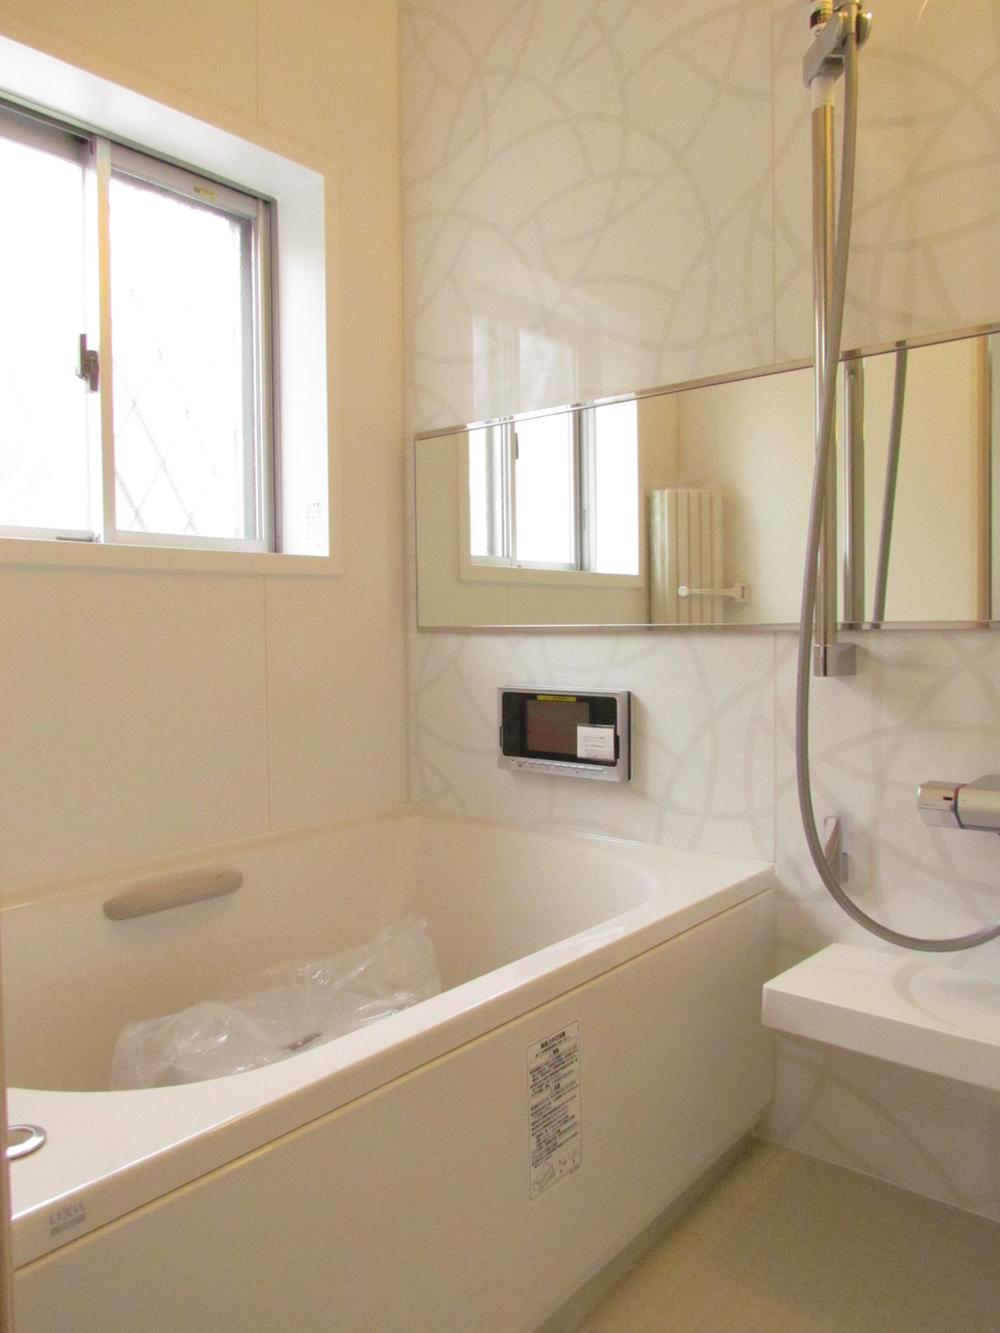 Bathroom. By there is a bathroom window, It eliminates the need to moisture up in the bathroom ventilation dryer! You can also save electricity bill!